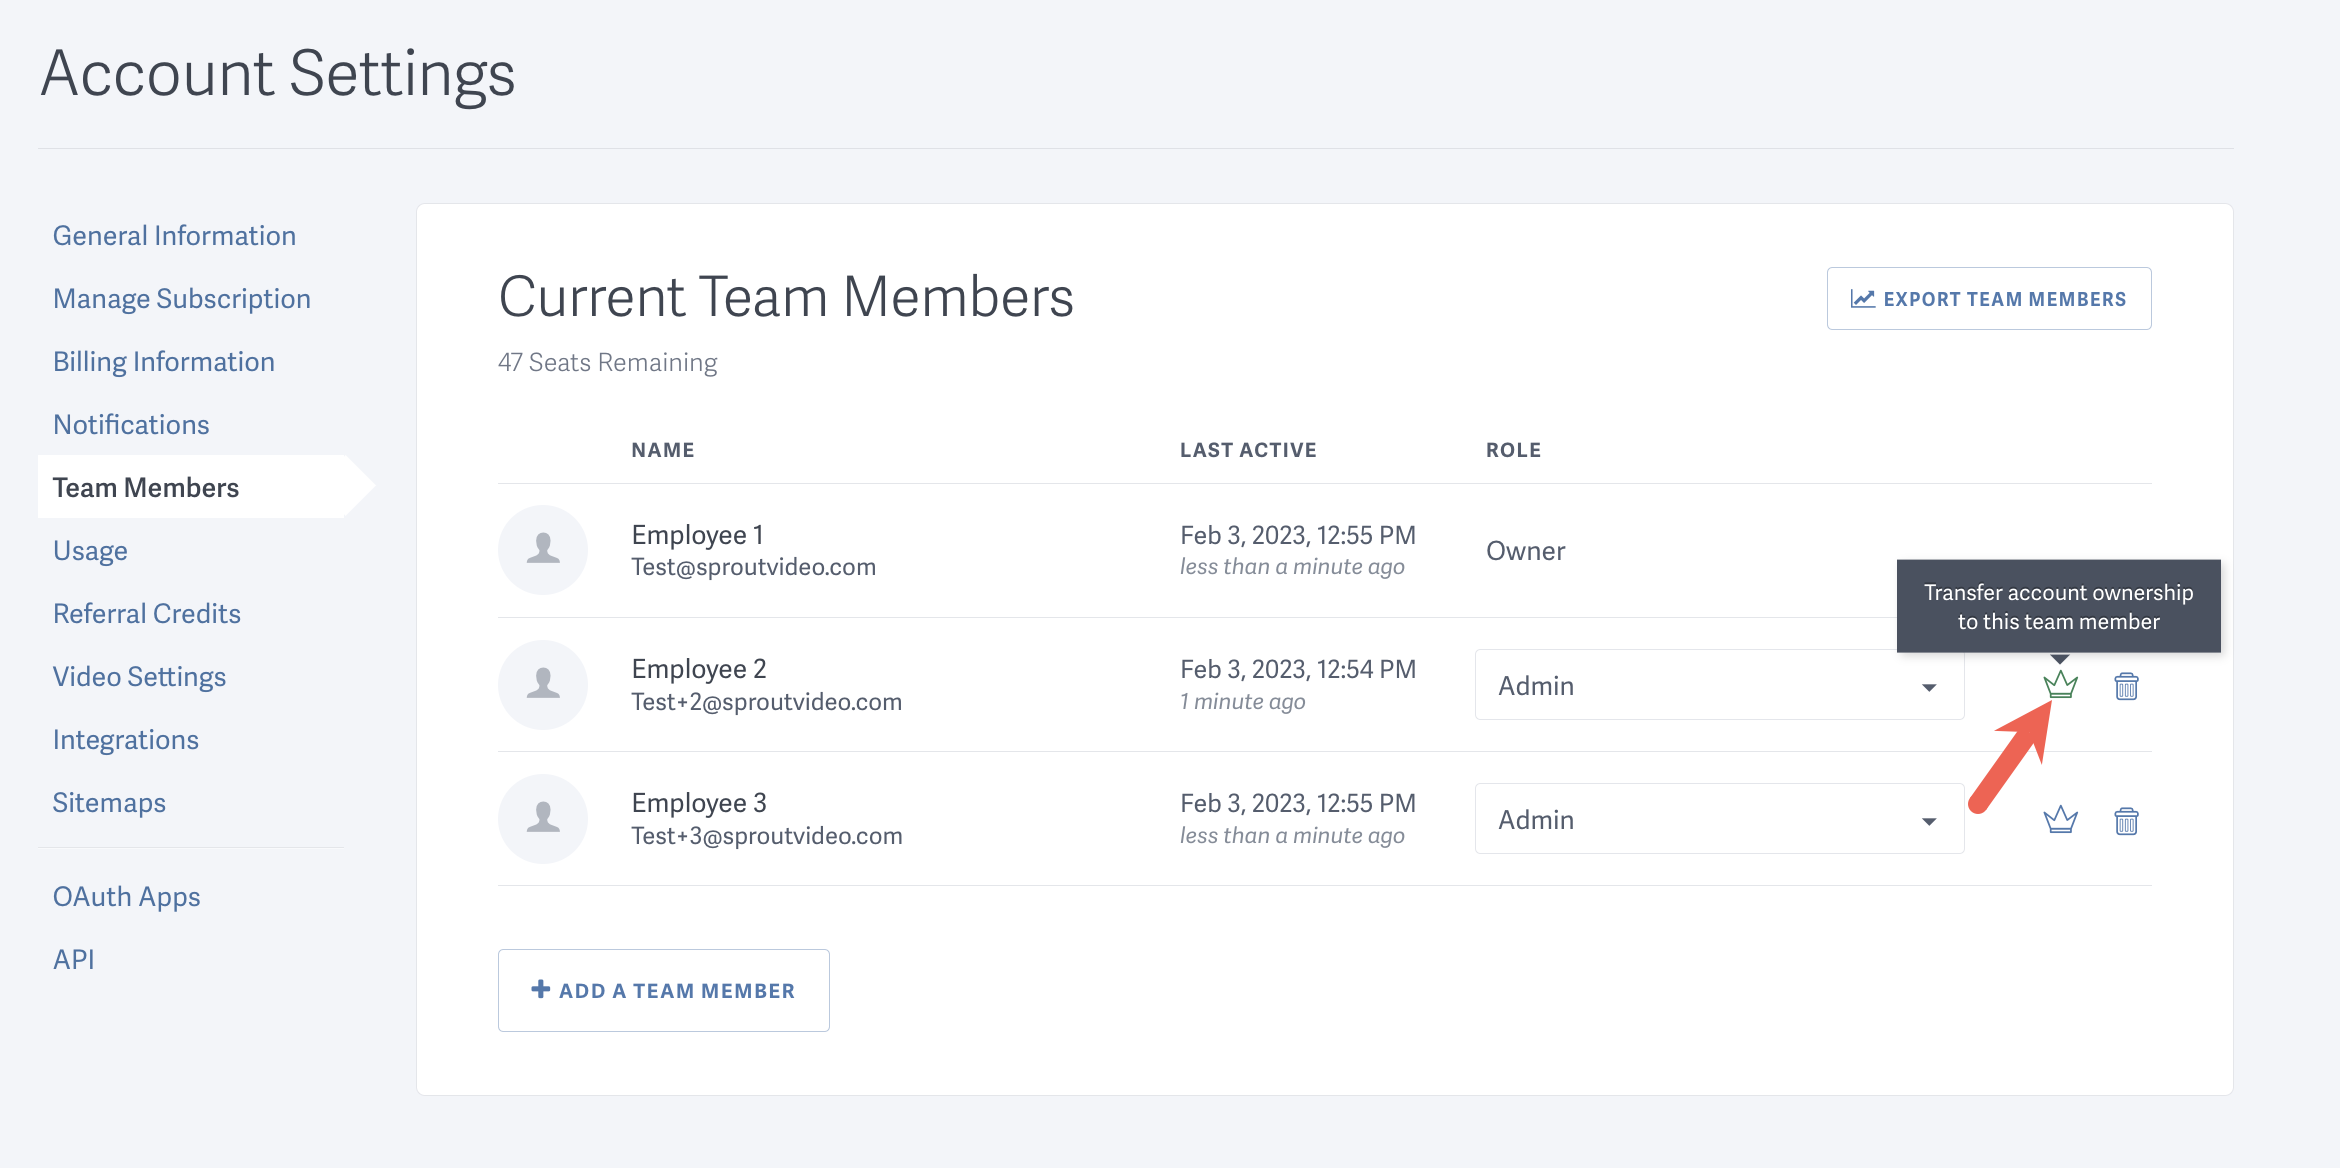 Transferring Account Ownership to Existing Team Member!